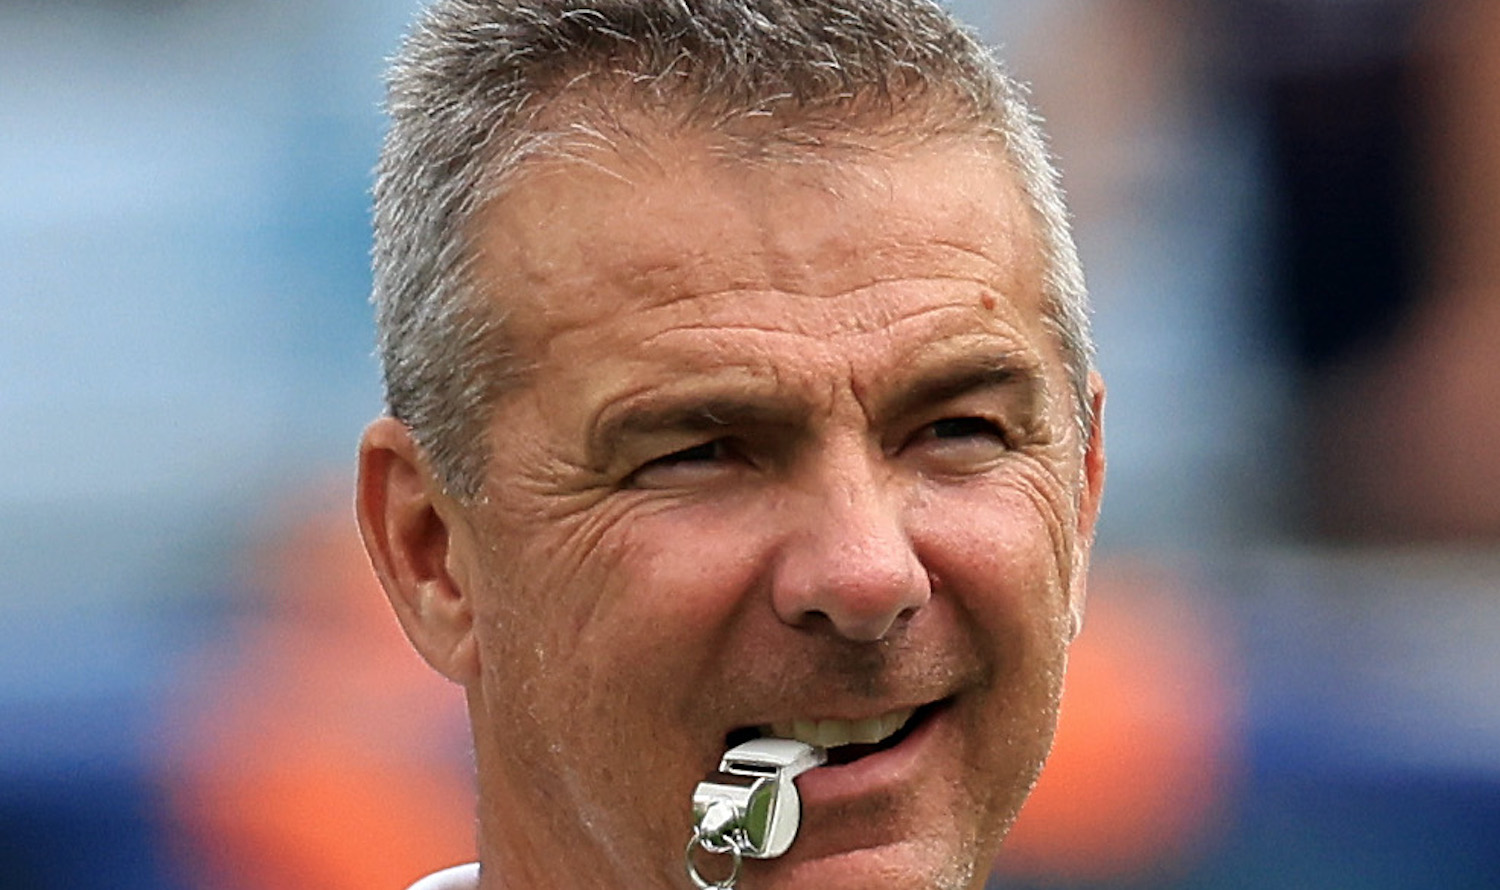 JACKSONVILLE, FLORIDA - SEPTEMBER 19: Head coach Urban Meyer of the Jacksonville Jaguars watches warmups prior to the game against the Denver Broncos at TIAA Bank Field on September 19, 2021 in Jacksonville, Florida. (Photo by Sam Greenwood/Getty Images)